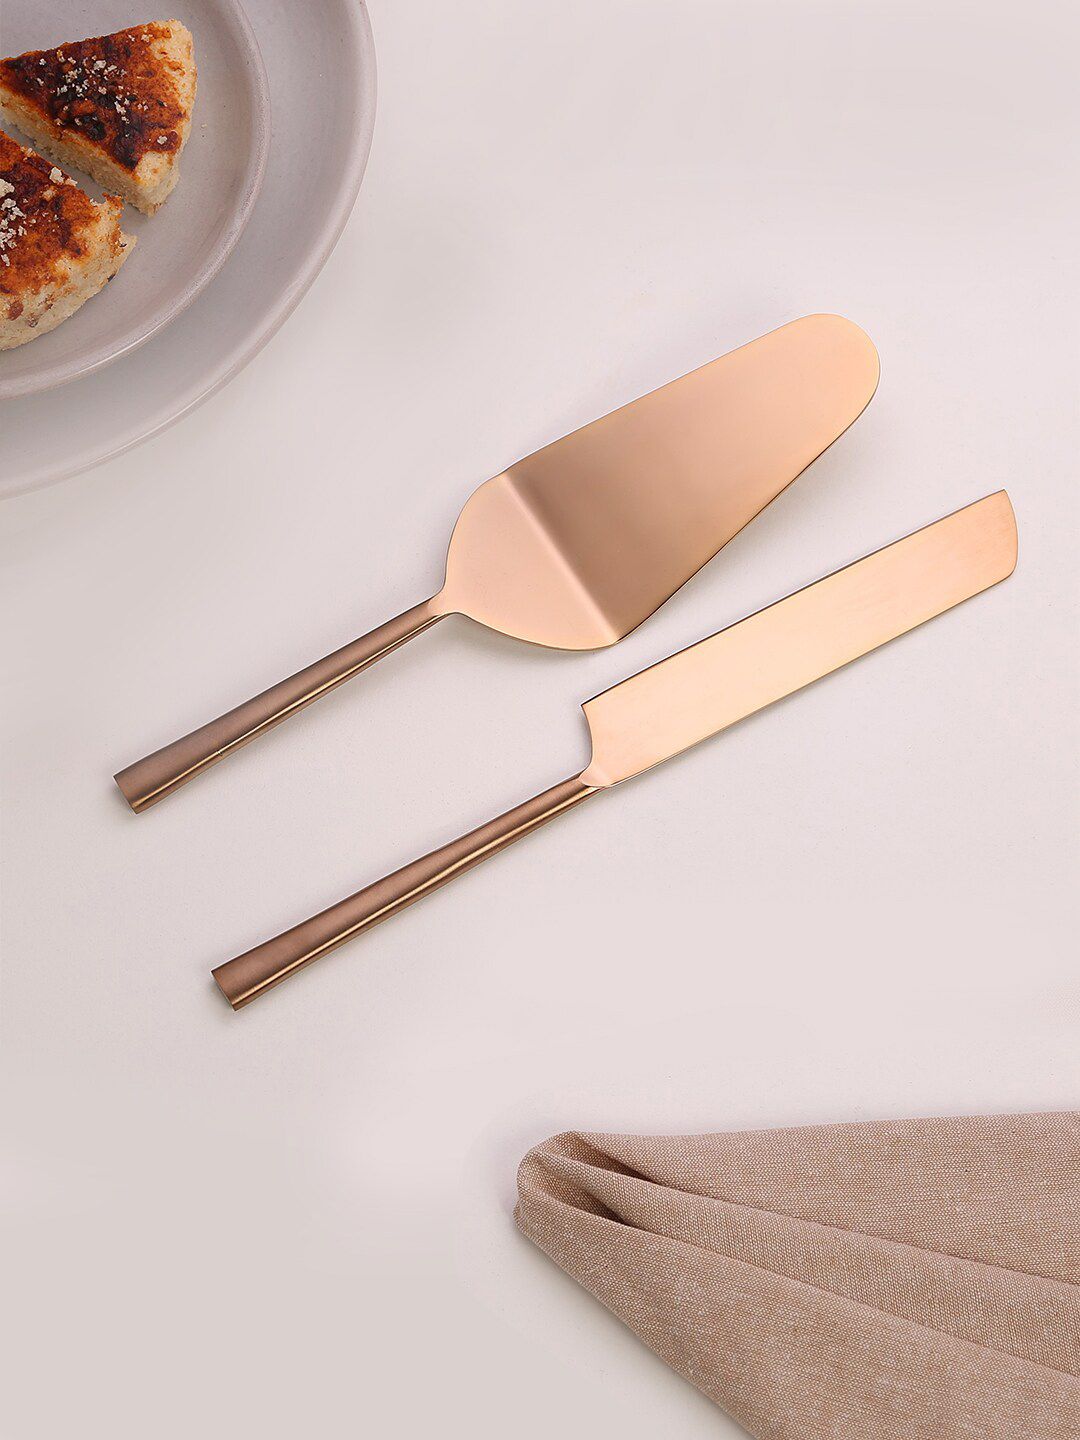 ellementry Set Of 2 Gold-Toned Masai Cake Serving Knife & Spatula Set Price in India